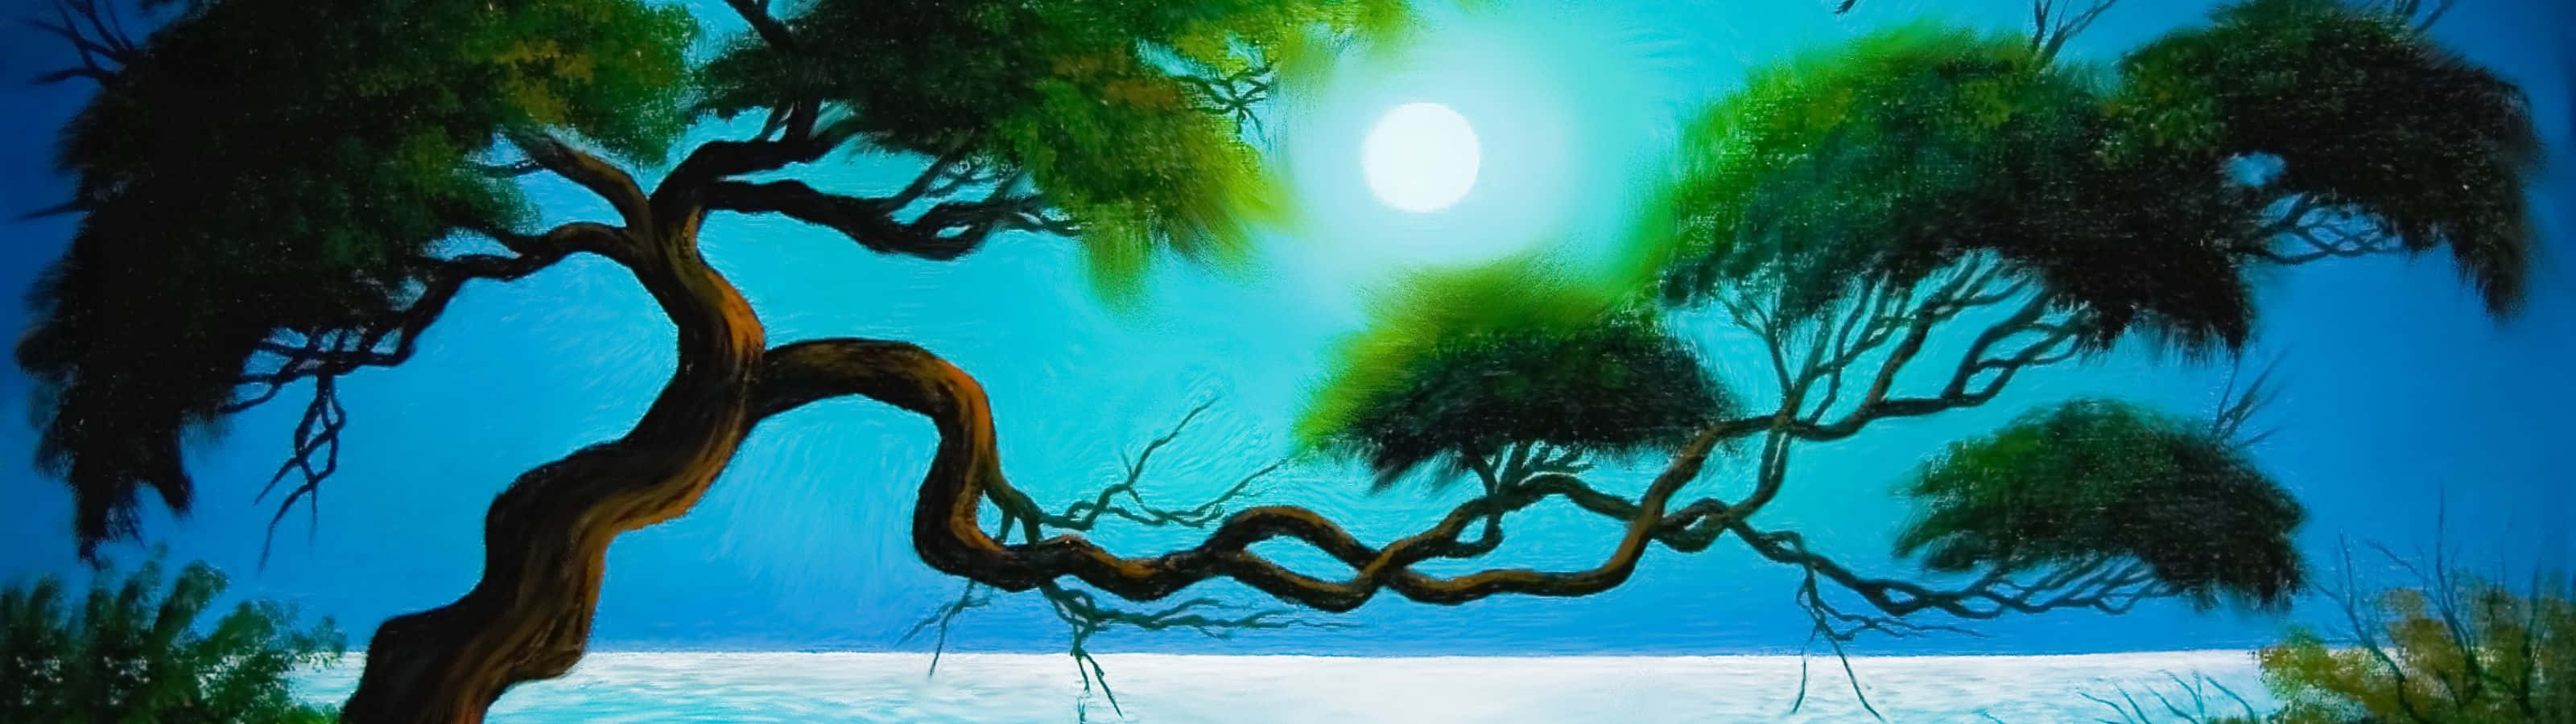 a painting of a tree in the water Wallpaper